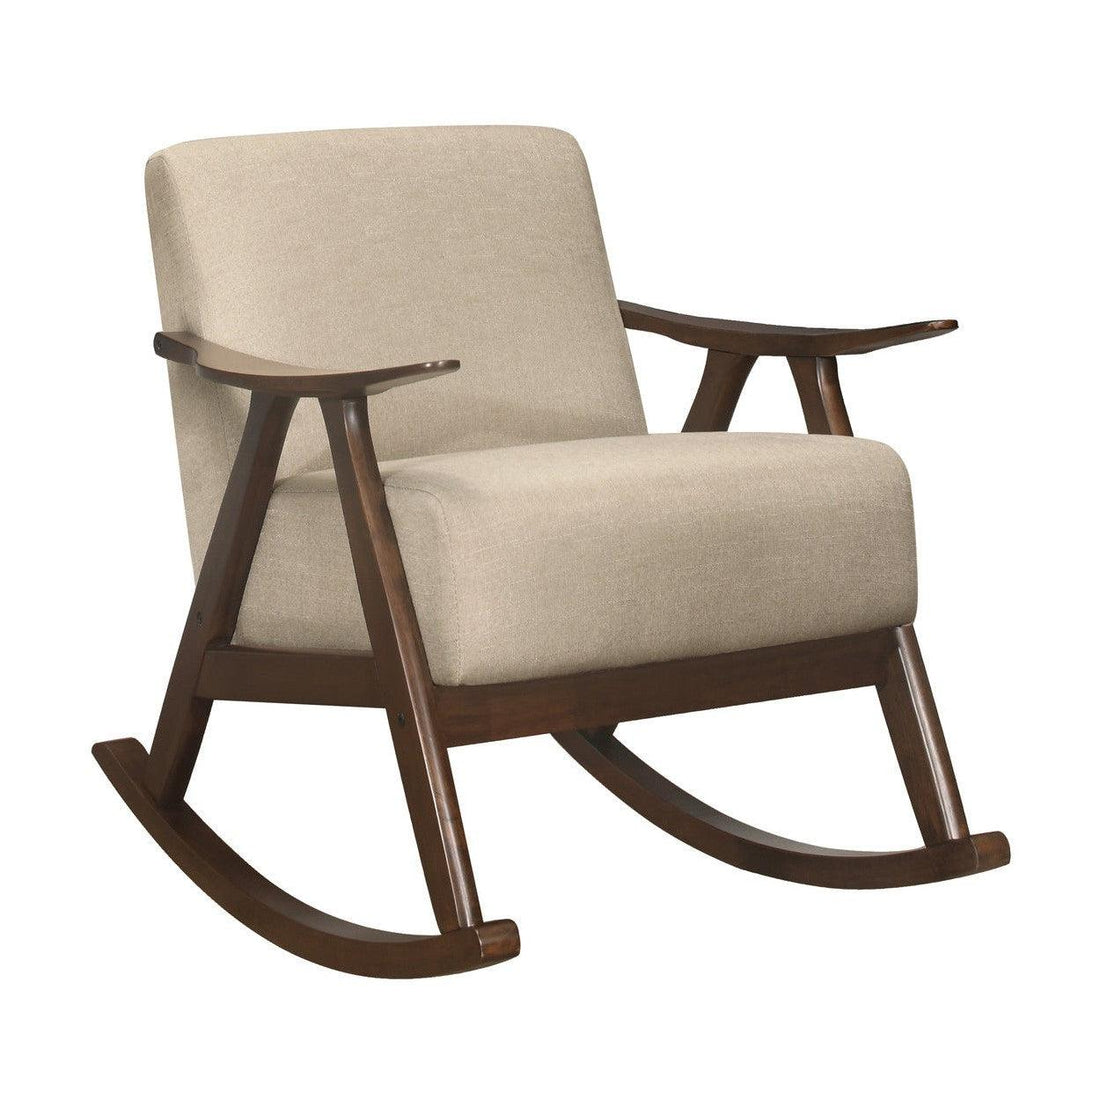 ROCKING CHAIR, LIGHT BROWN 100% POLY. 1034BR-1